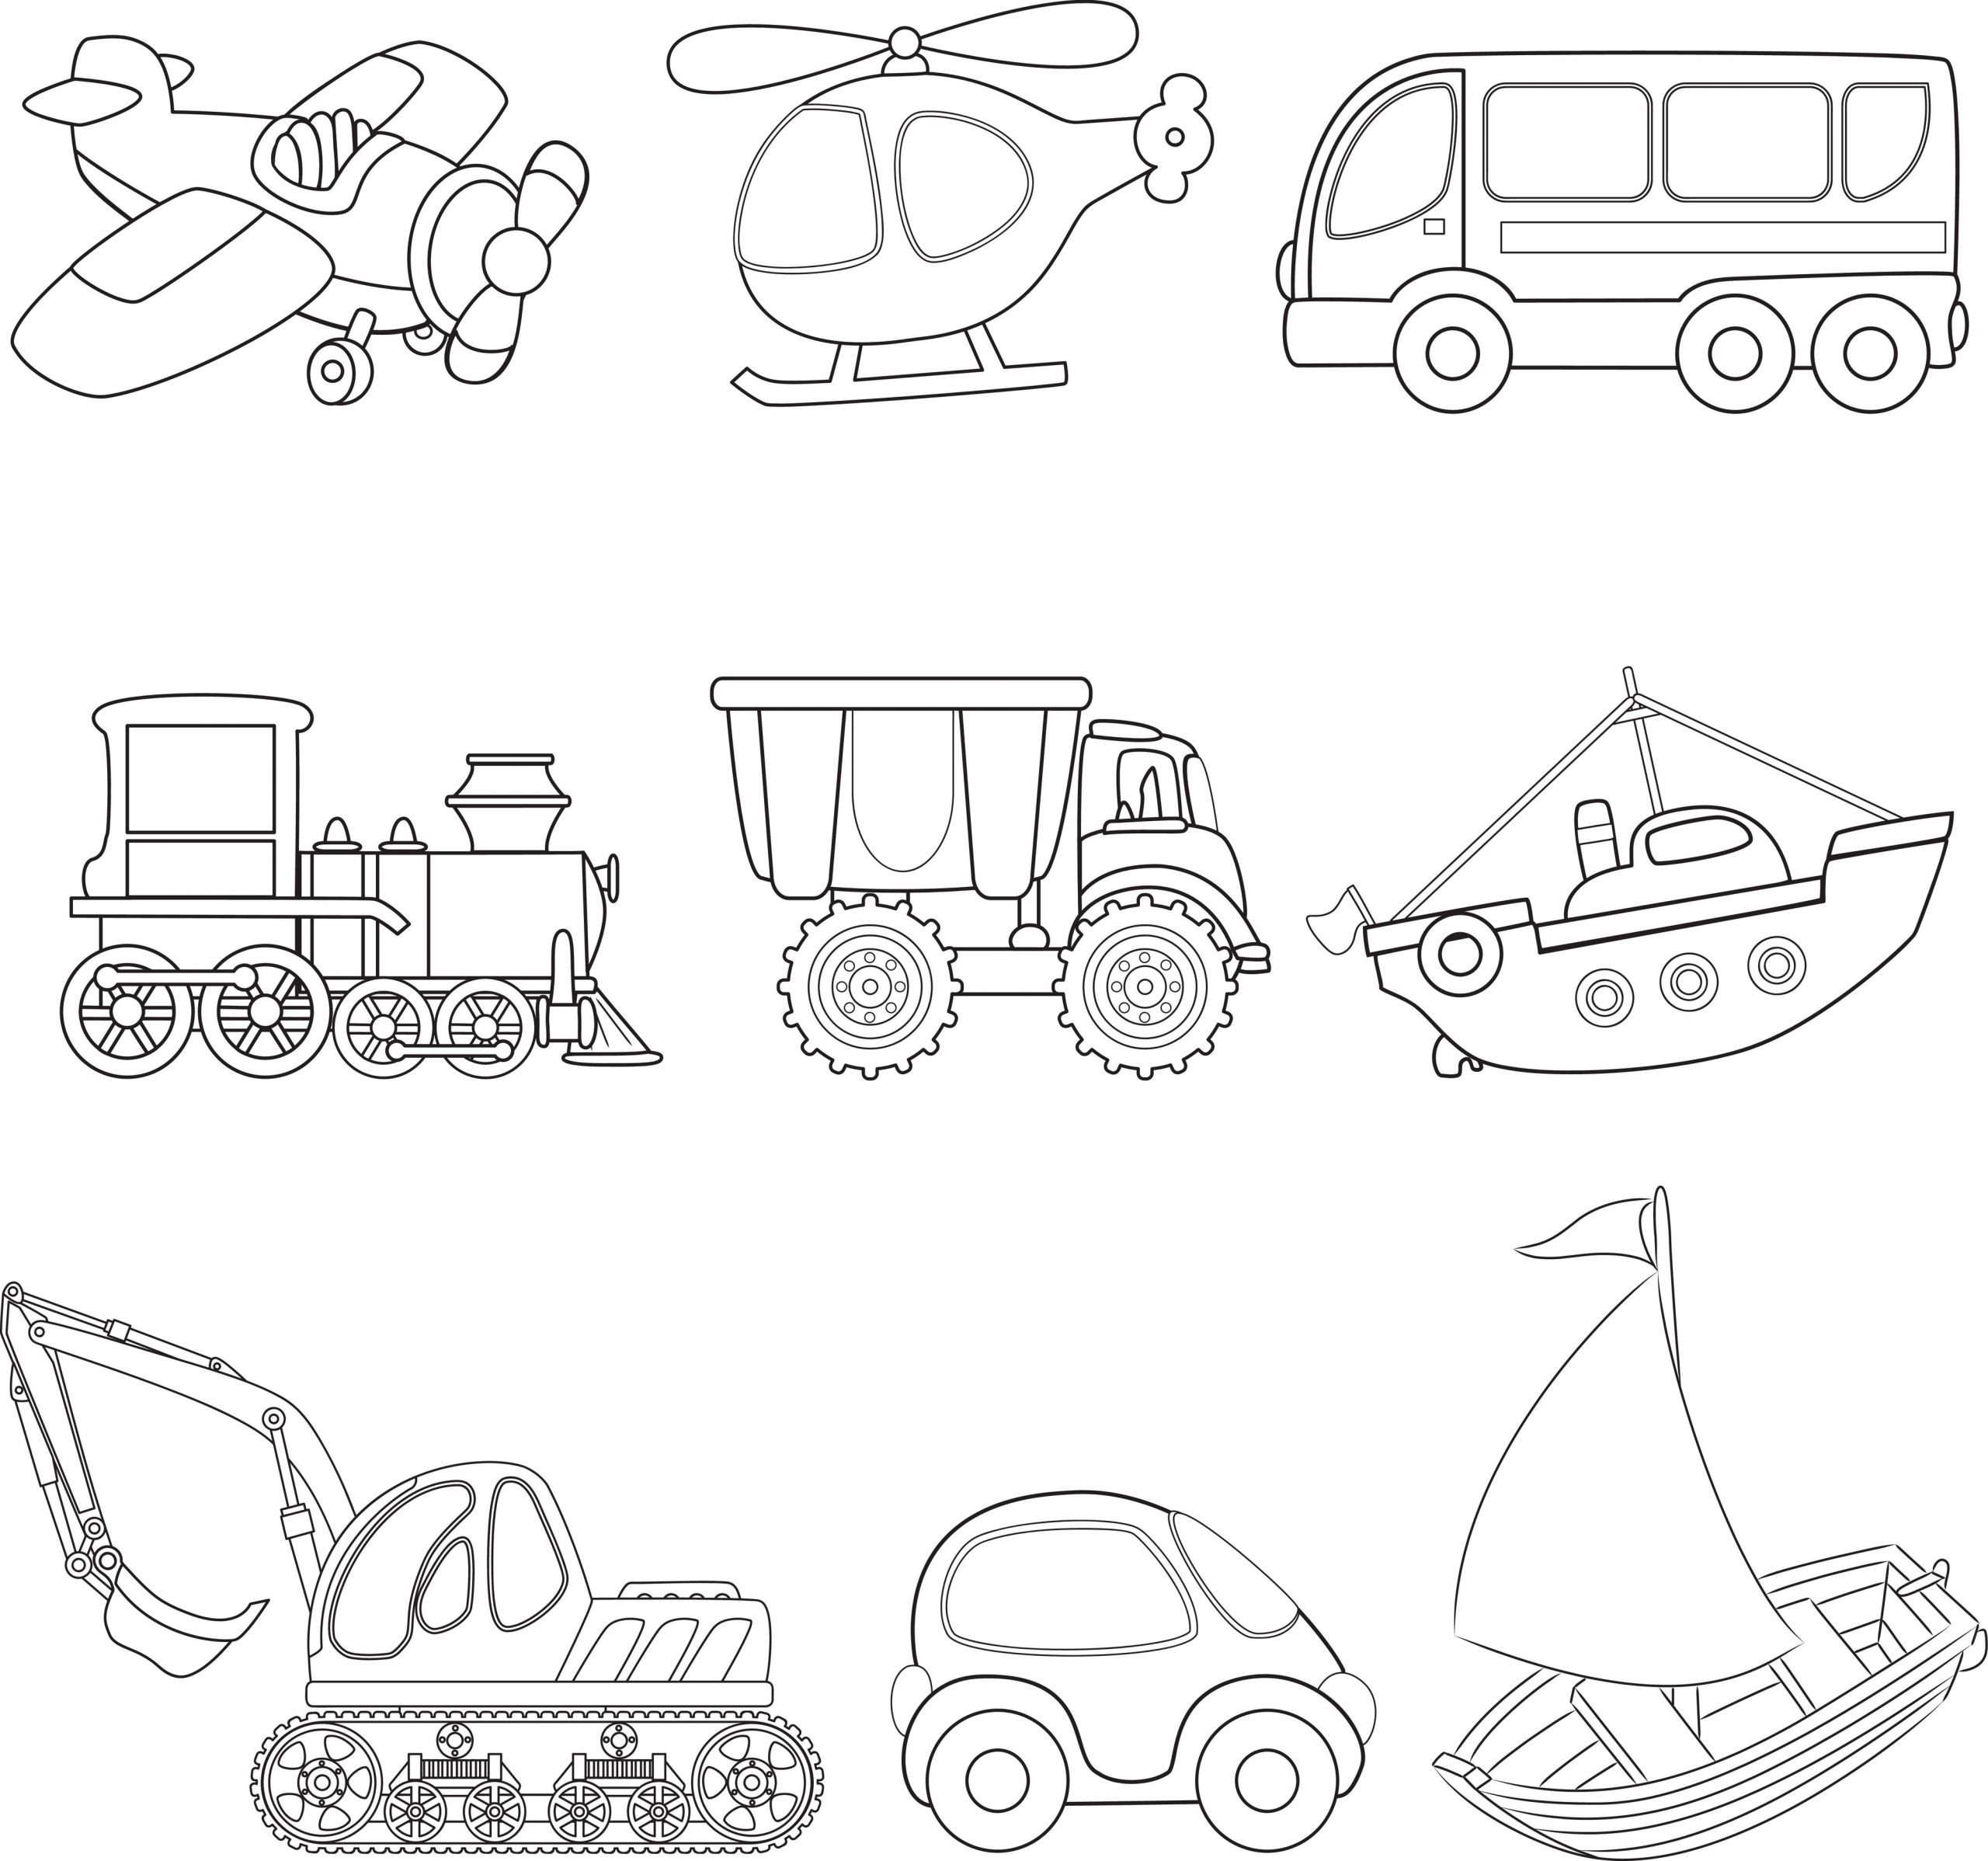 Transportation Coloring Pages For Toddlers
 Cartoon transport Coloring book Lilt Kids Coloring Books